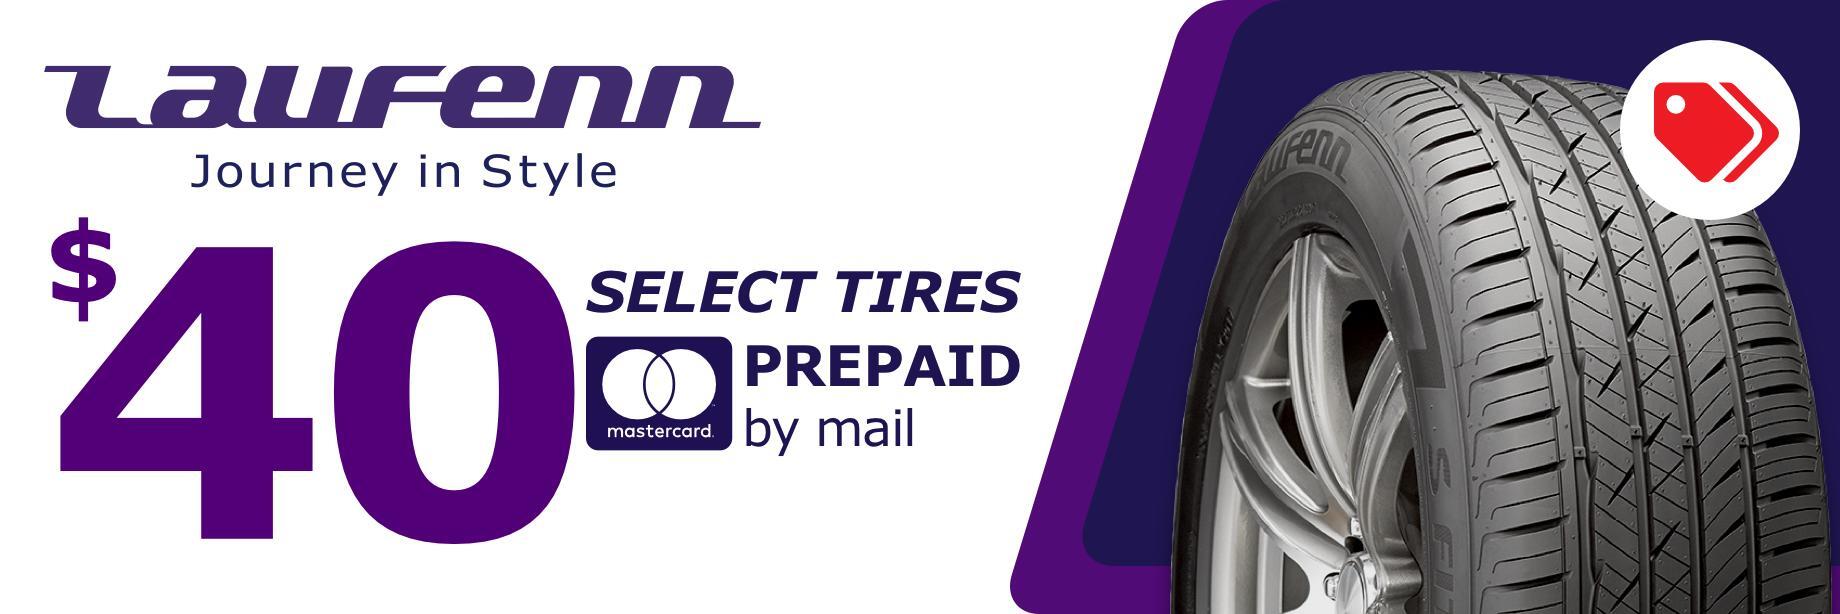 Laufenn tire rebate for may 2021 with Discount Tire Direct